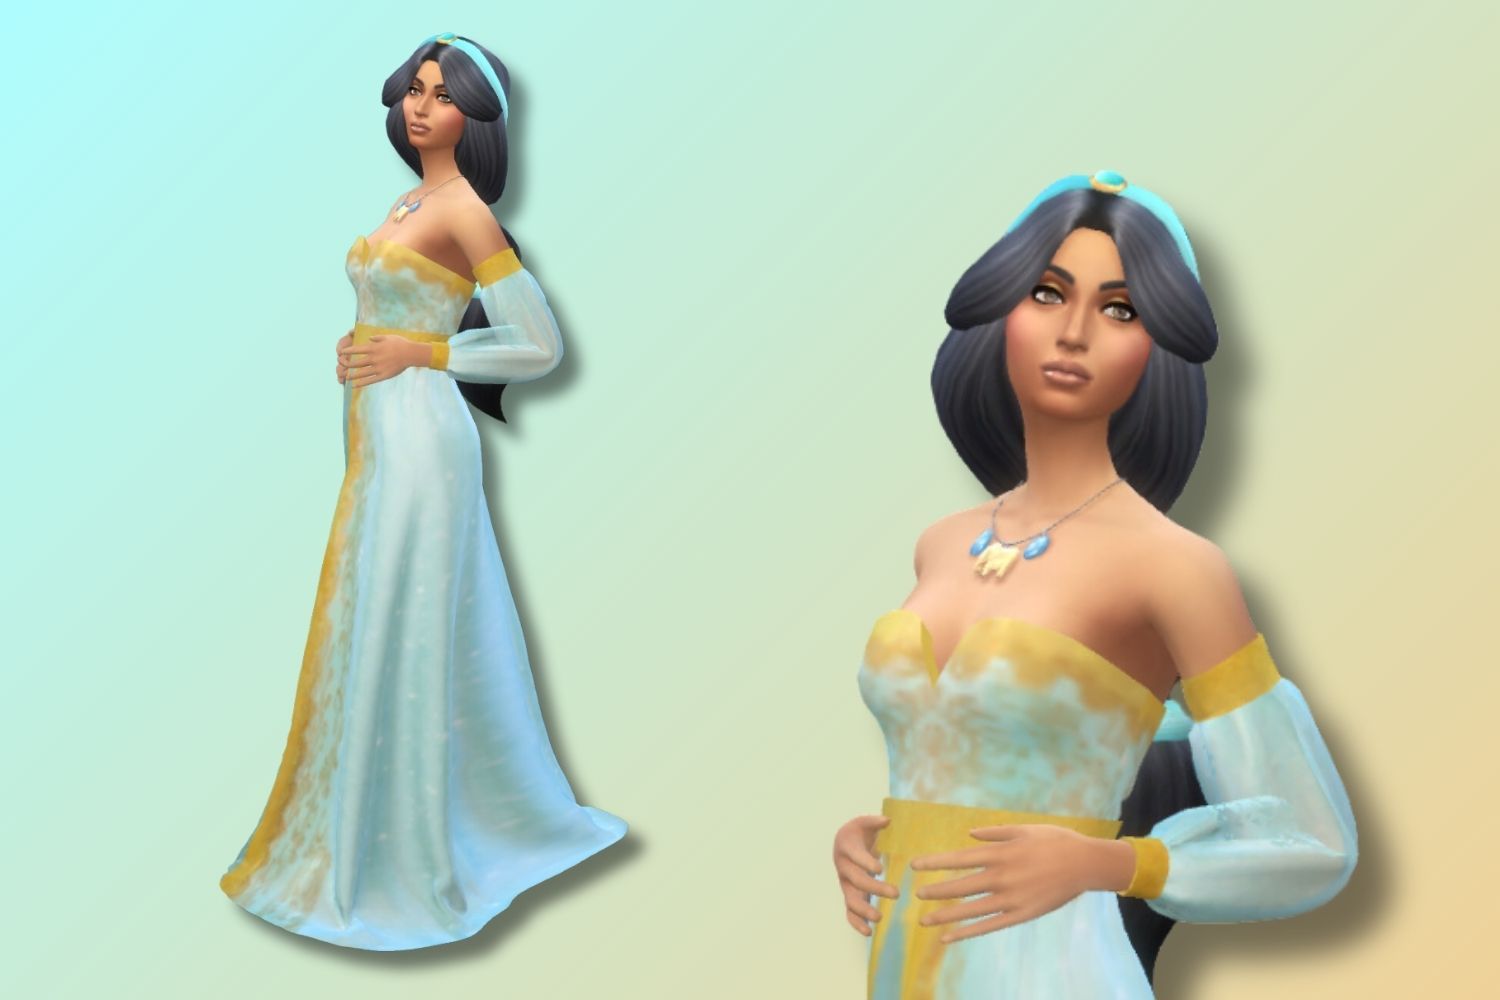 A Sim that looks like Disney's Jasmine stands against a blue and yellow background.